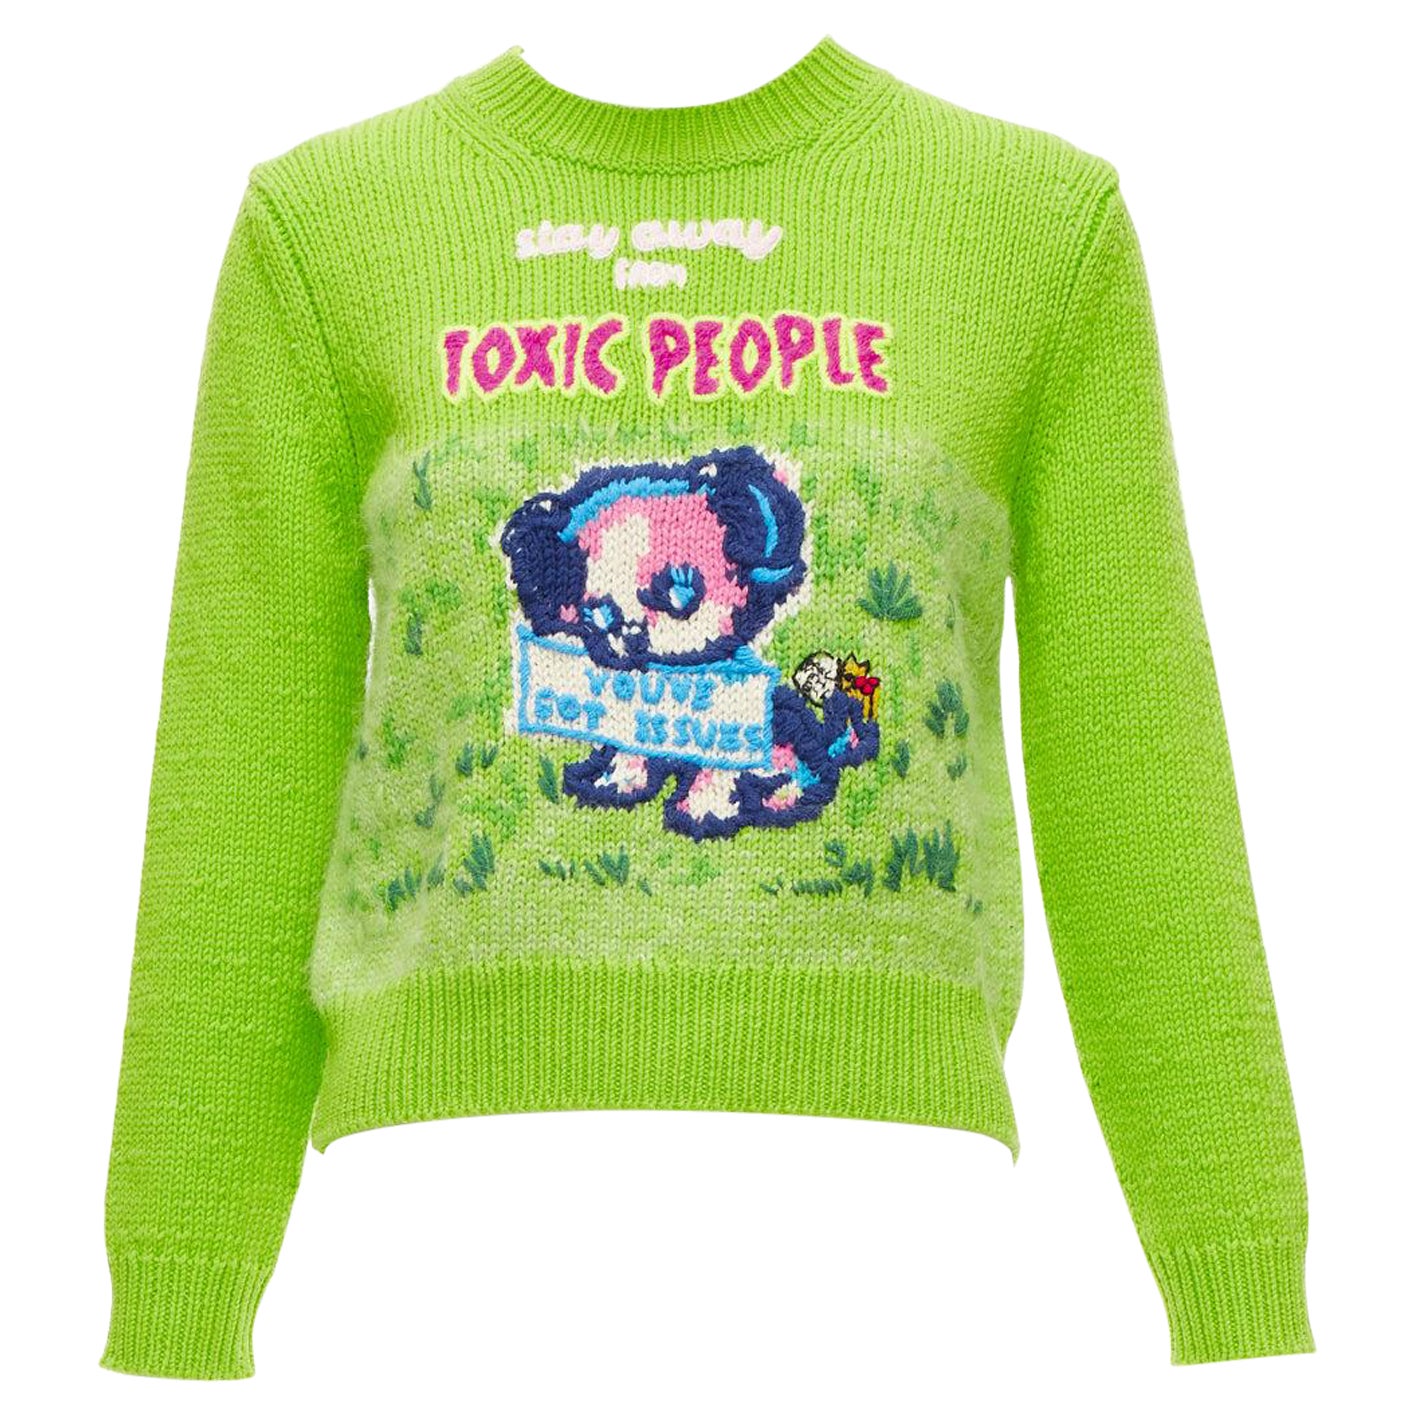 MARC JACOBS Magda Archer lime green Toxic People intarsia cropped sweater XS For Sale